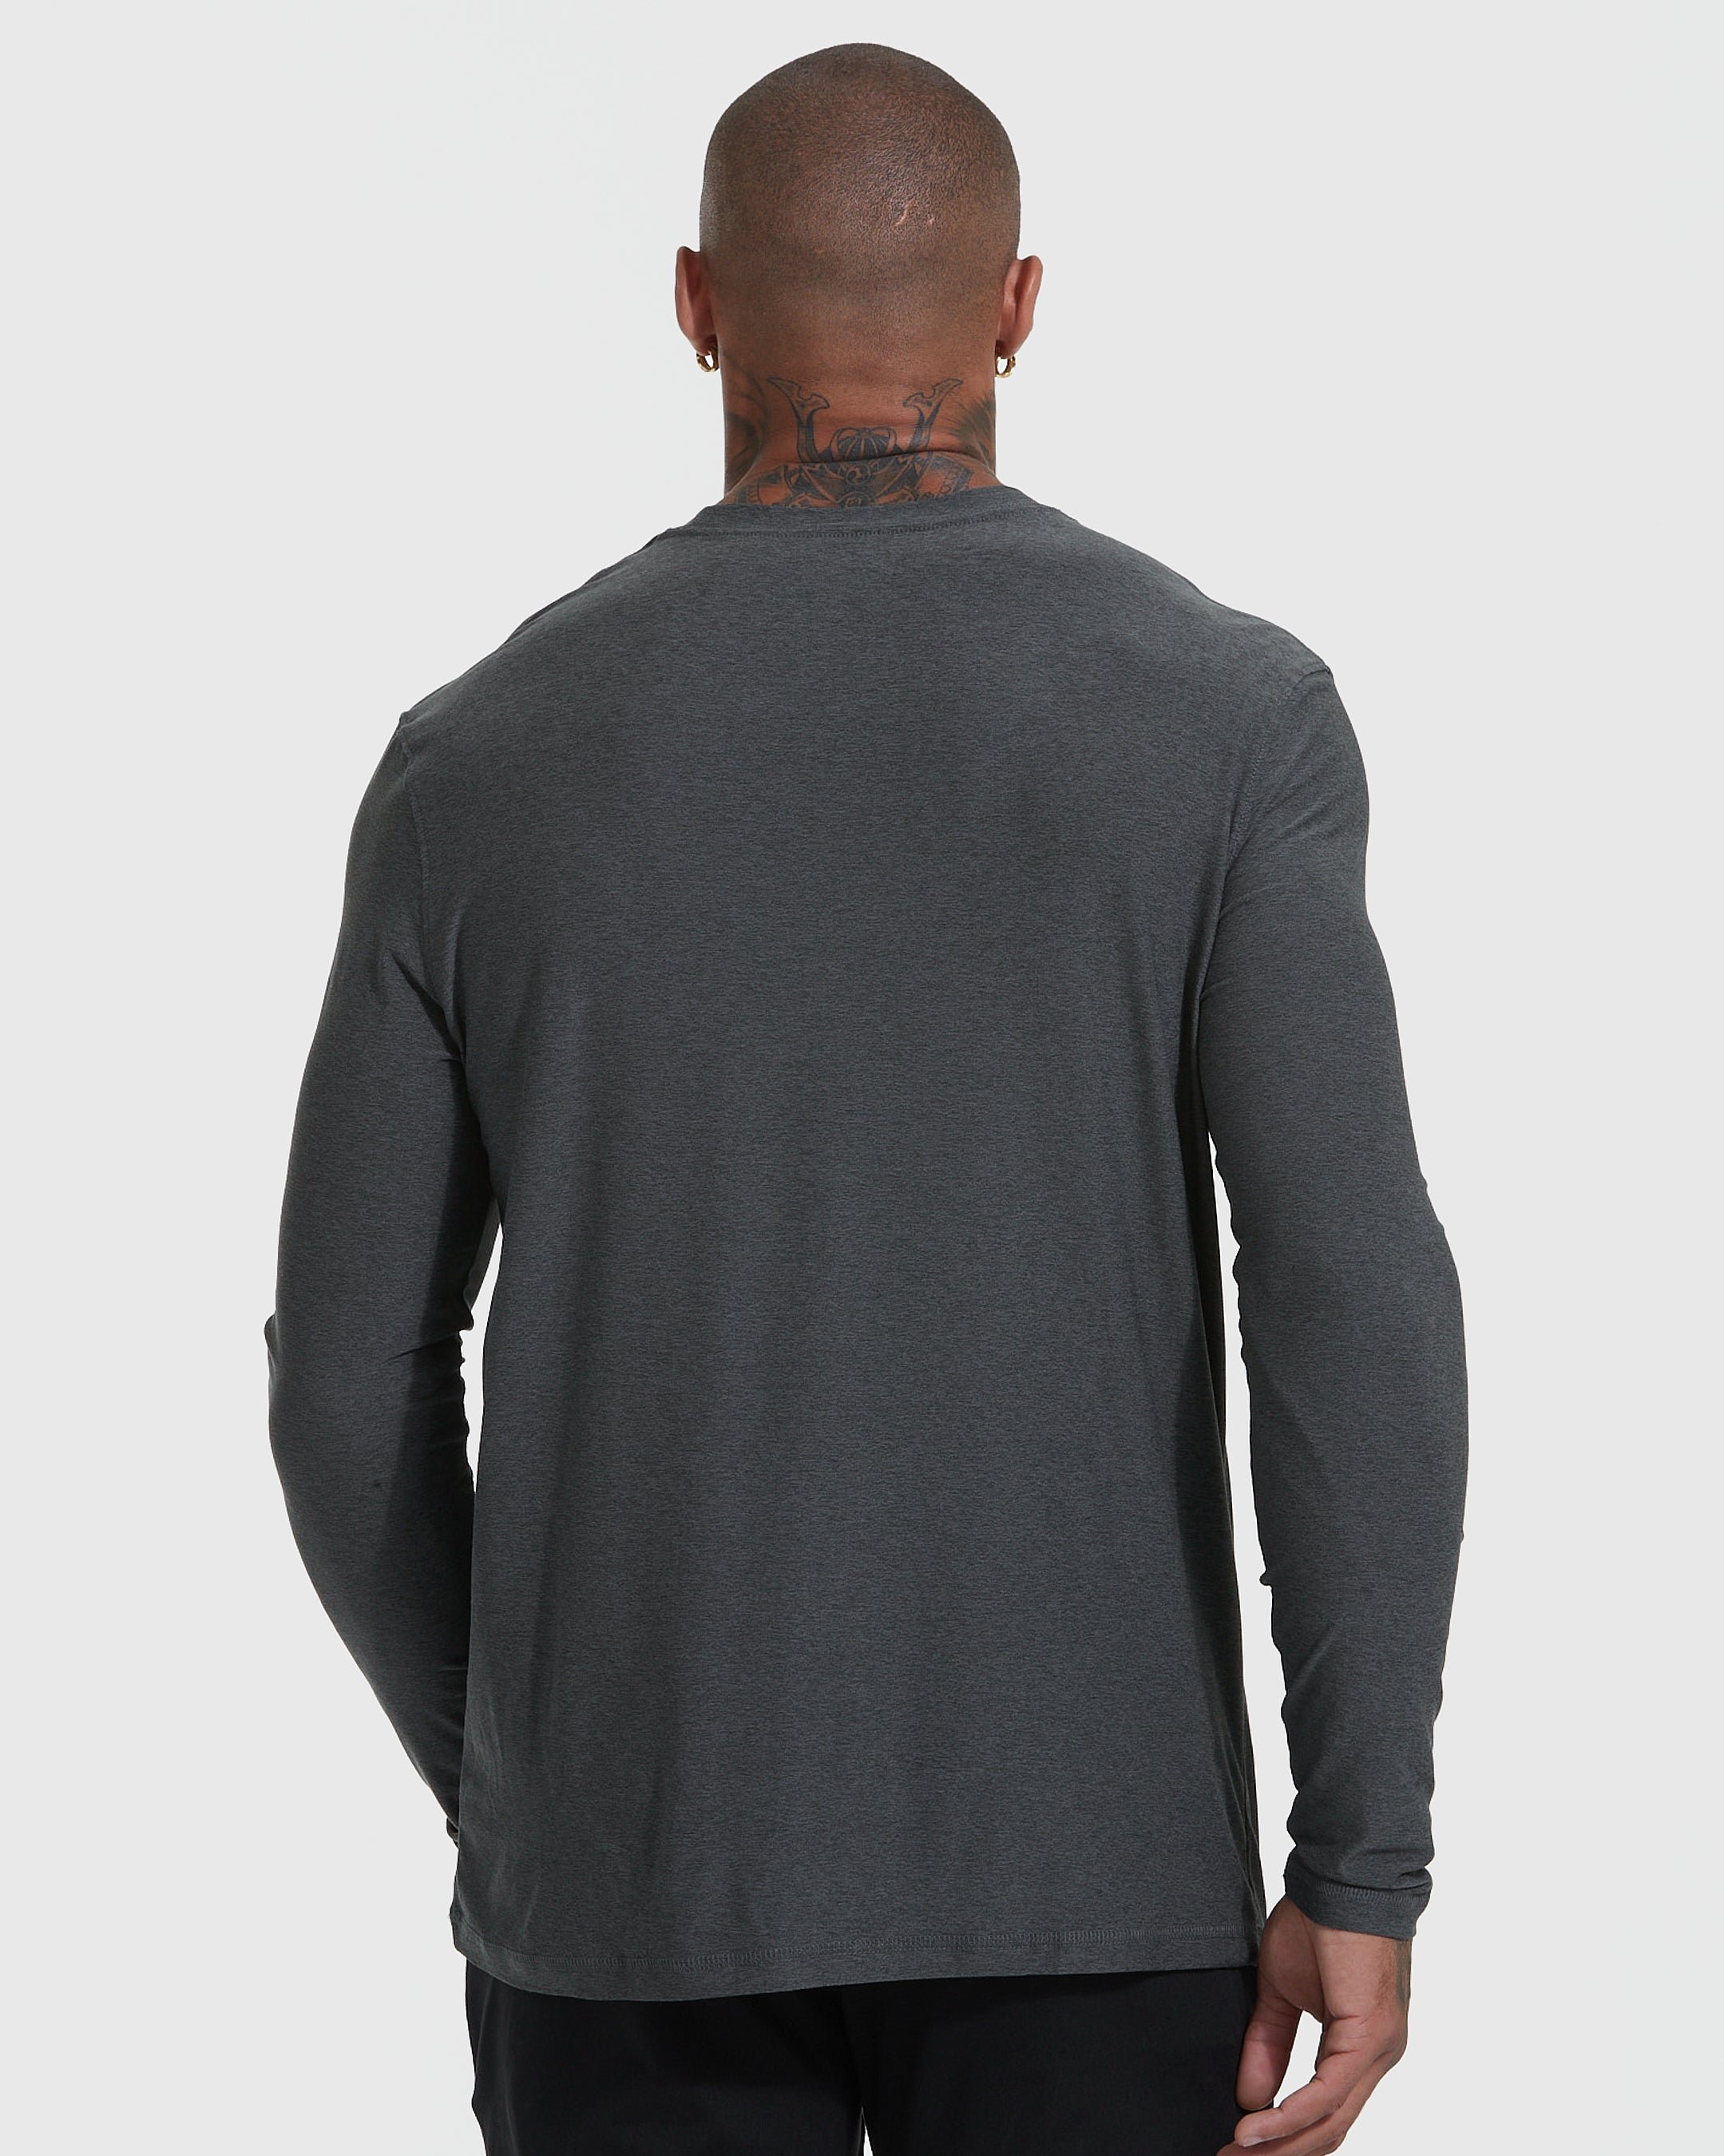 Heather Color Active Long Sleeve Crew 3-Pack